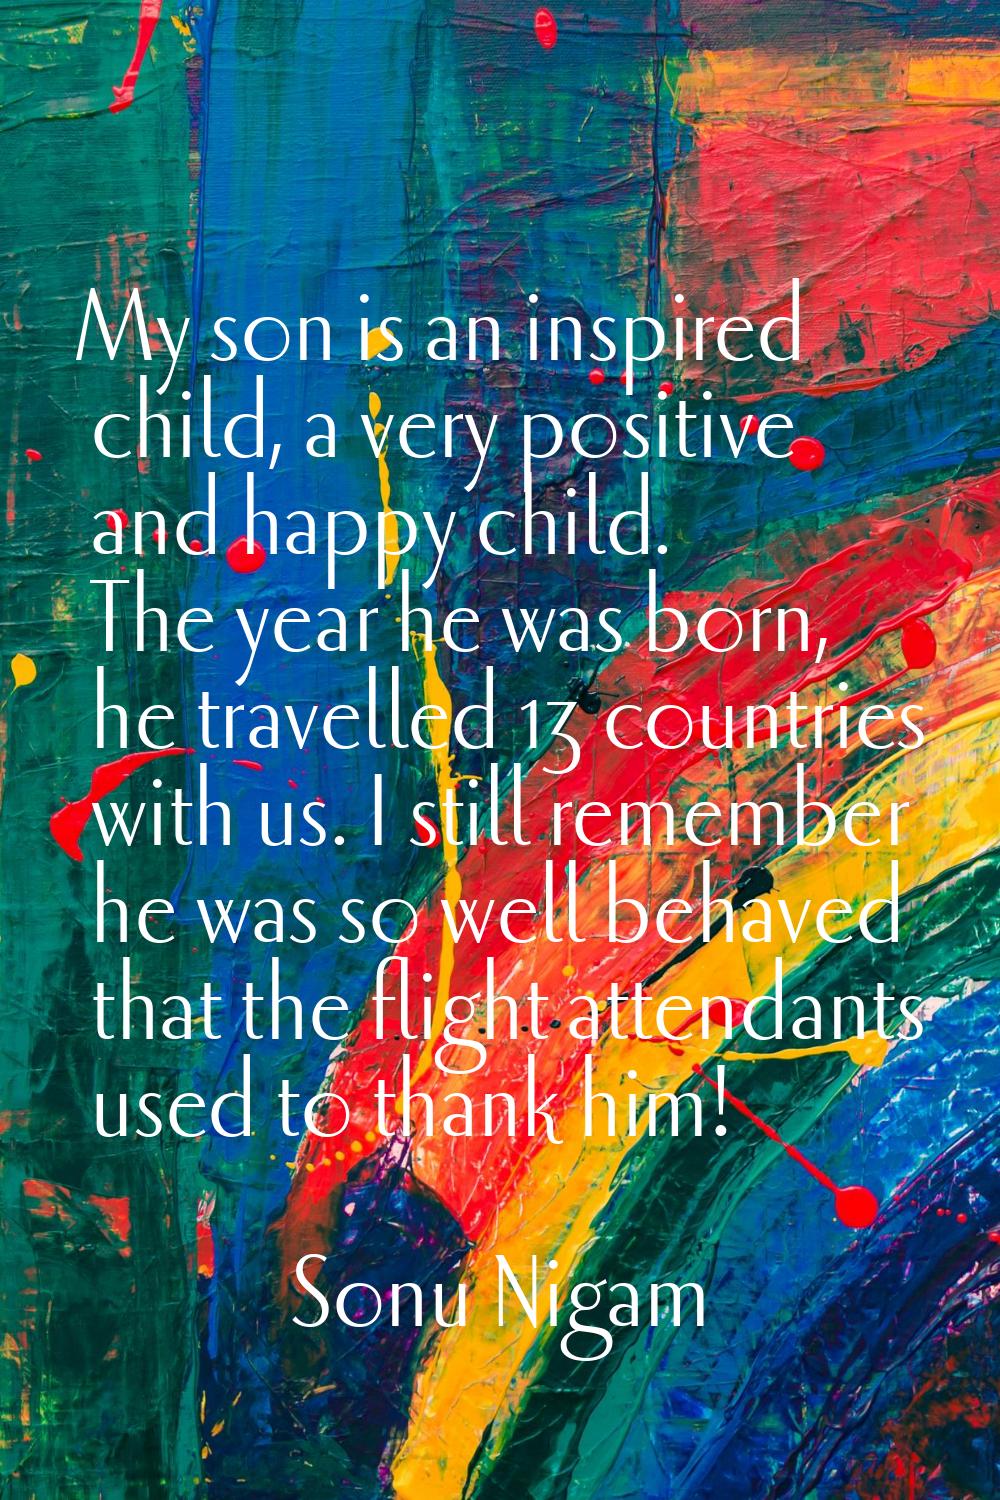 My son is an inspired child, a very positive and happy child. The year he was born, he travelled 13